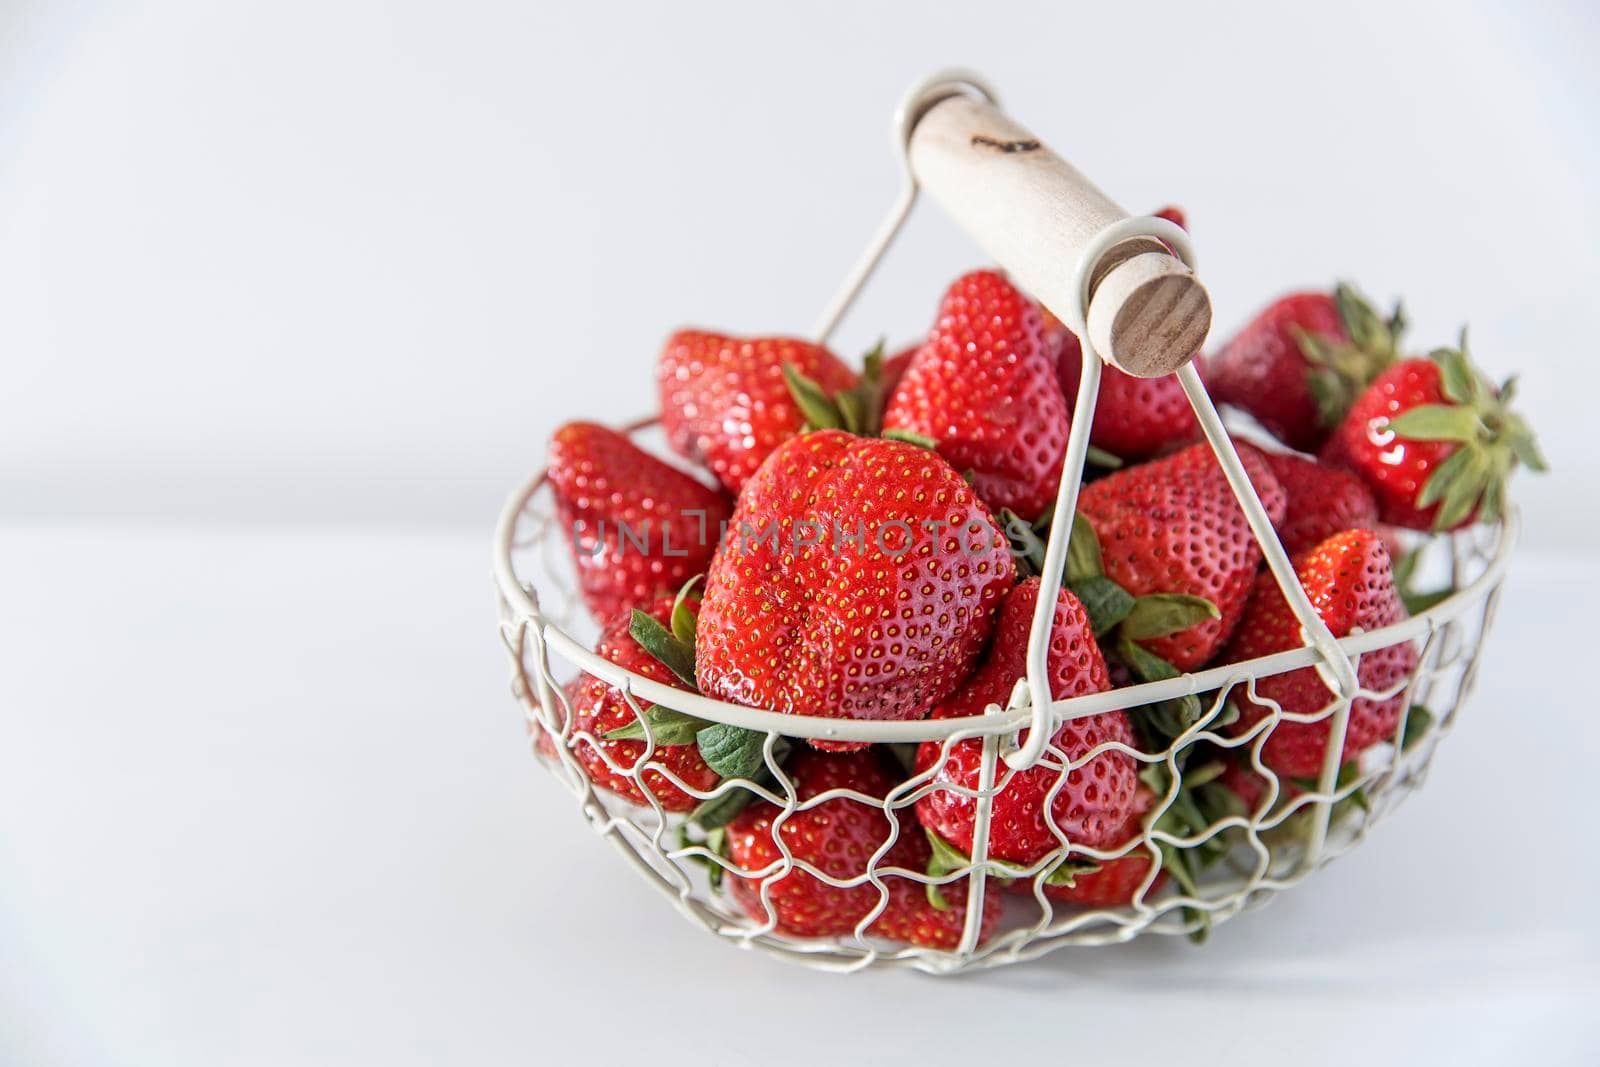 White metal basket with wooden handle with fresh strawberries is on the white table. Breakfast